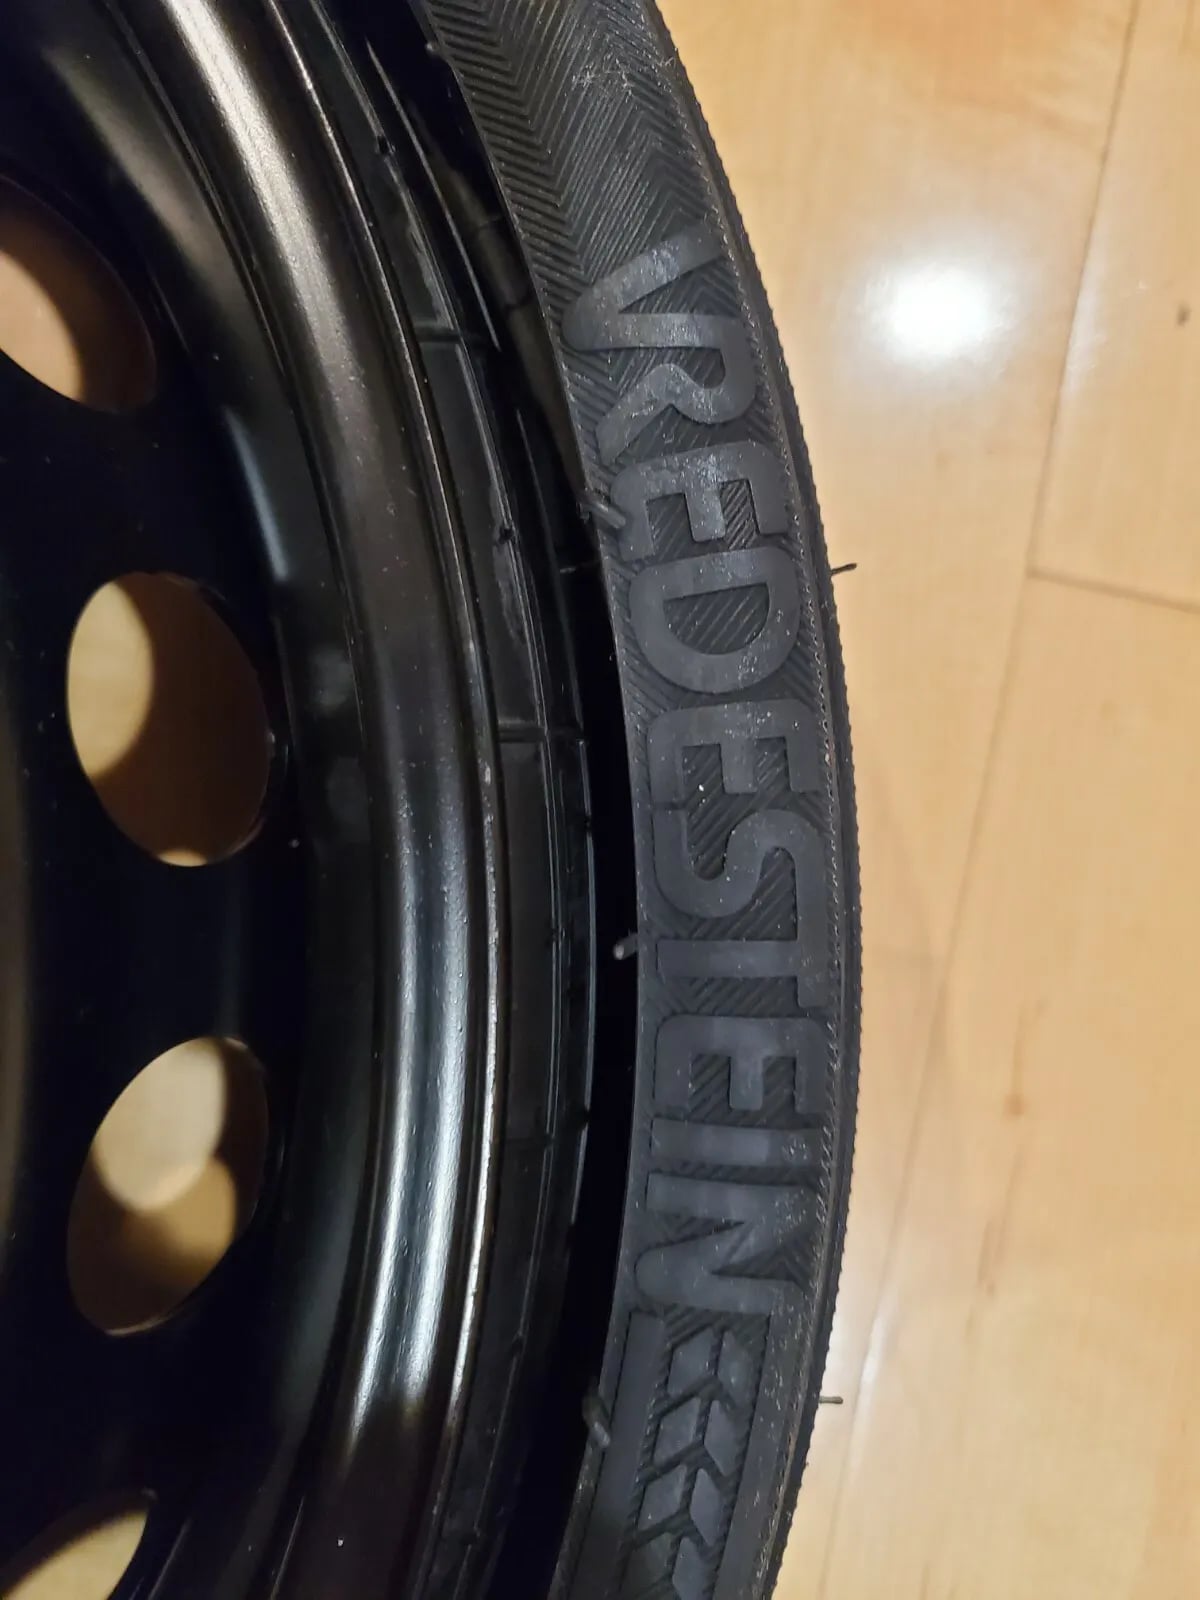 2007 Mercedes-Benz SLK55 AMG - OEM Spare Wheel + Tire (NEW, 171-400-22-00, $300) - Wheels and Tires/Axles - $300 - Altadena, CA 91001, United States